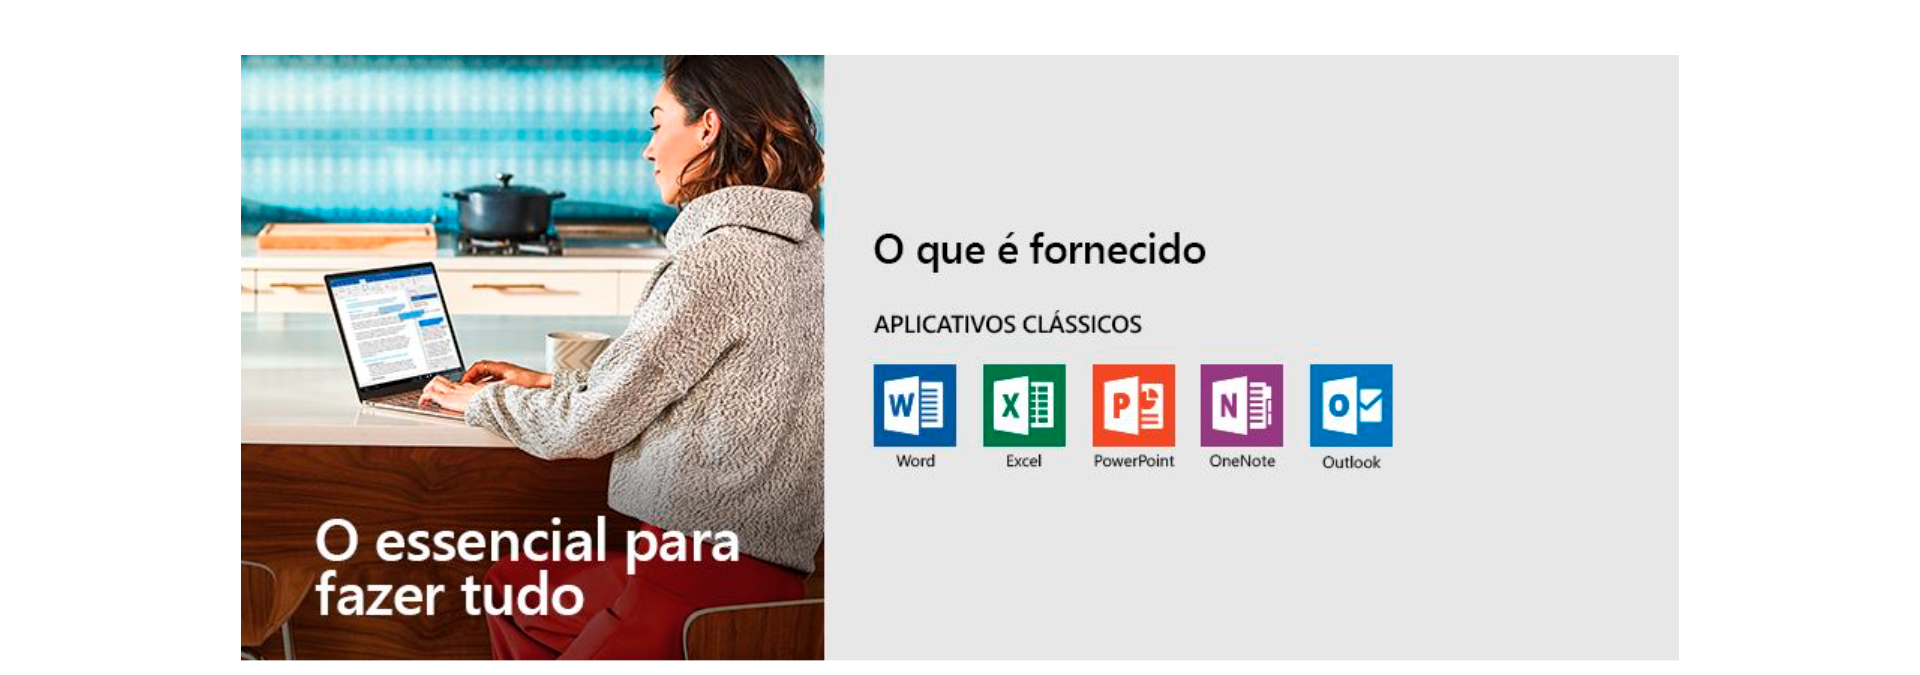 Office 2019 Home and Business Microsoft FPP 32/64 Bits - T5D-03241